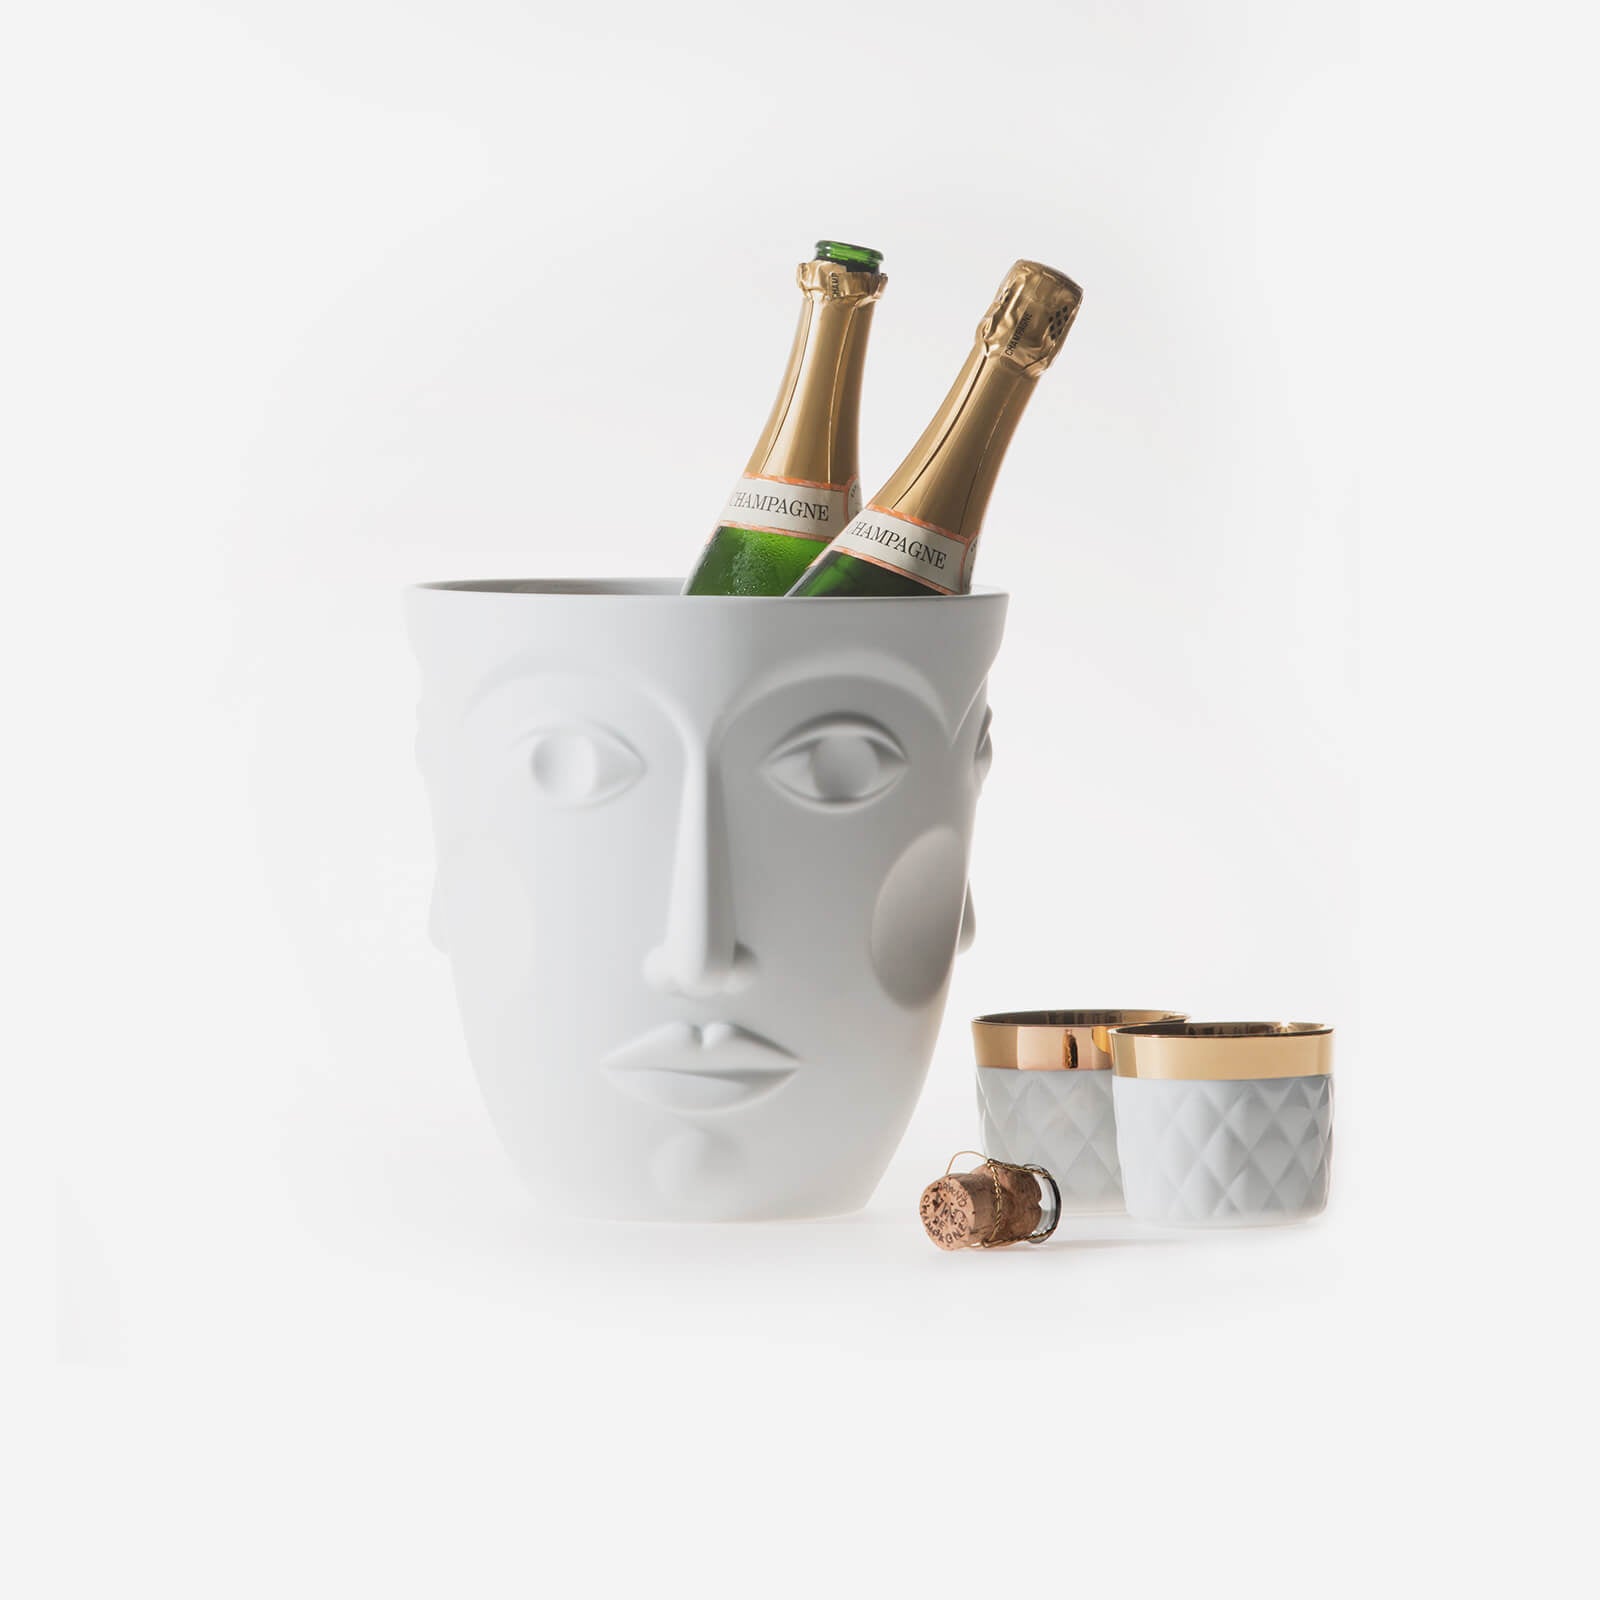 Fabergé & Château Champagne de Bligny Made the Ultimate Bottle Holder –  Robb Report